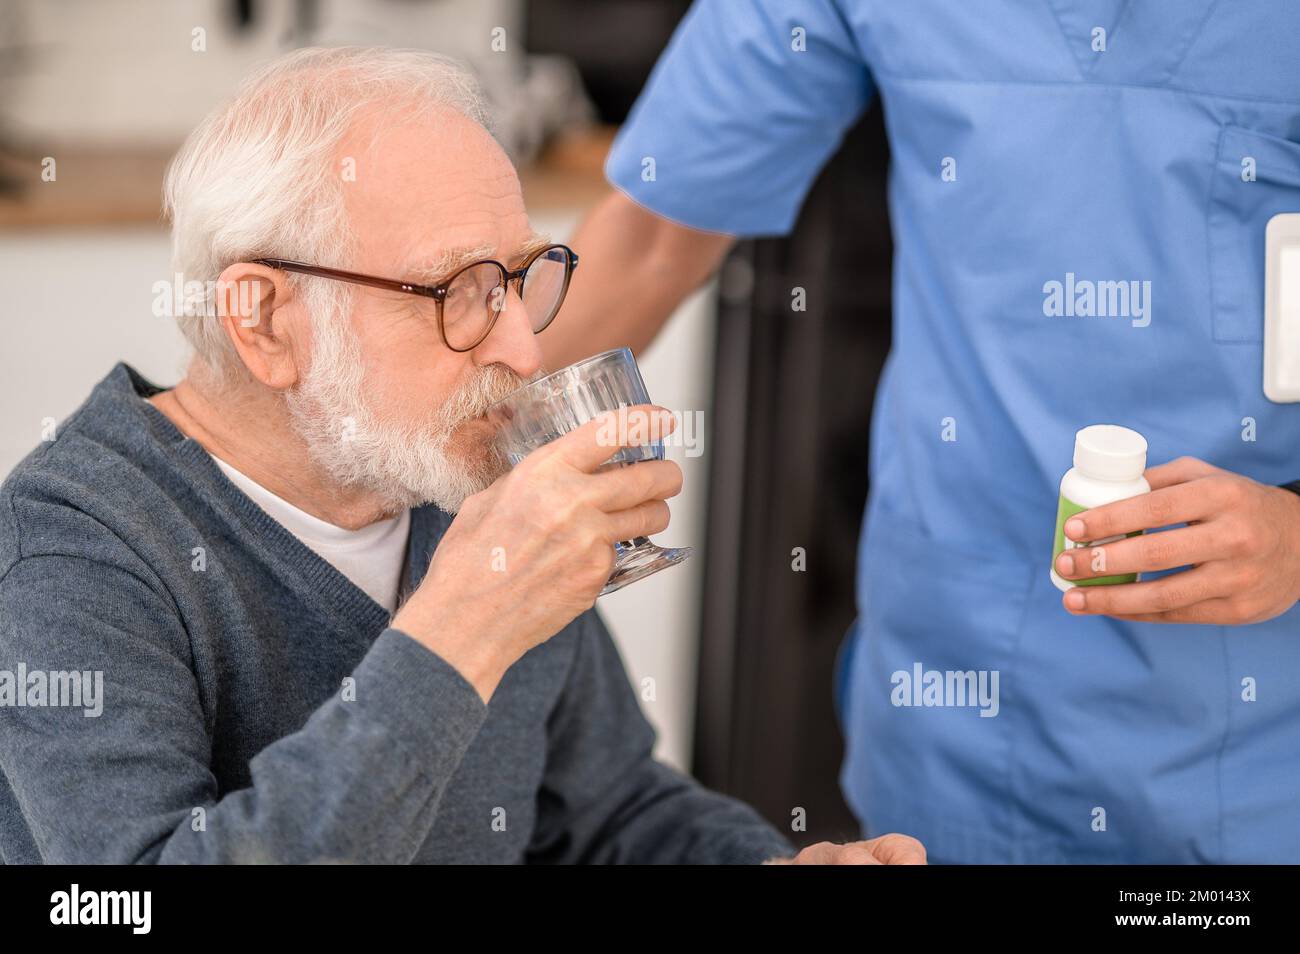 Elderly person washing down his pills with water under the supervision of his in-home nurse. Stock Photo